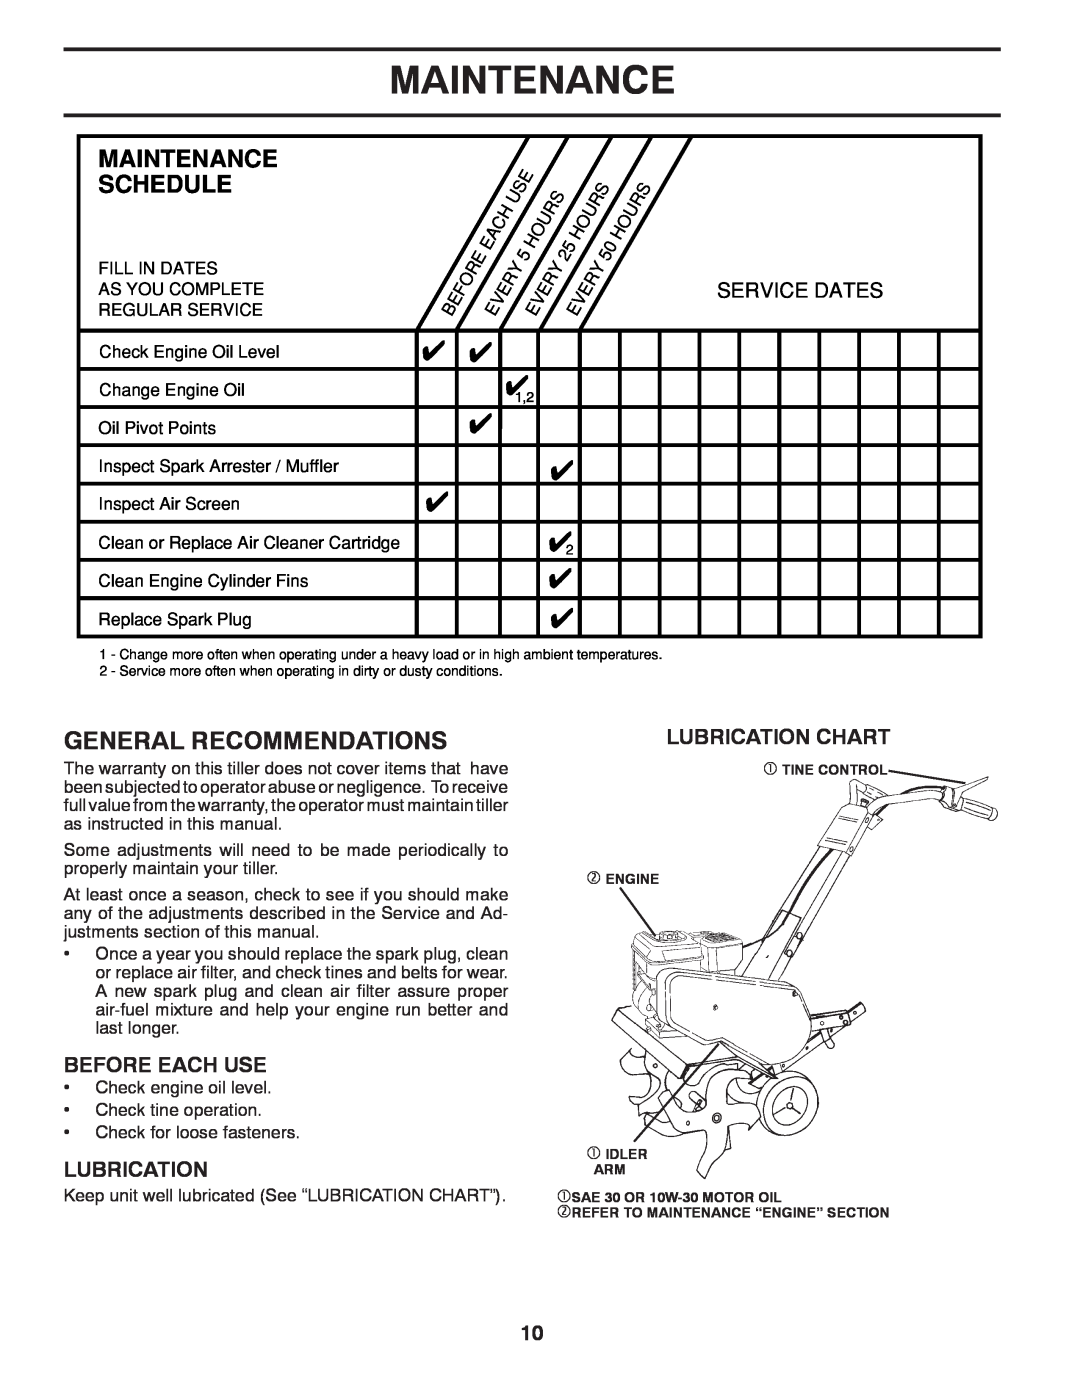 Poulan 413288 manual General Recommendations, Maintenance Schedule, Service Dates, Before Each Use, Lubrication 